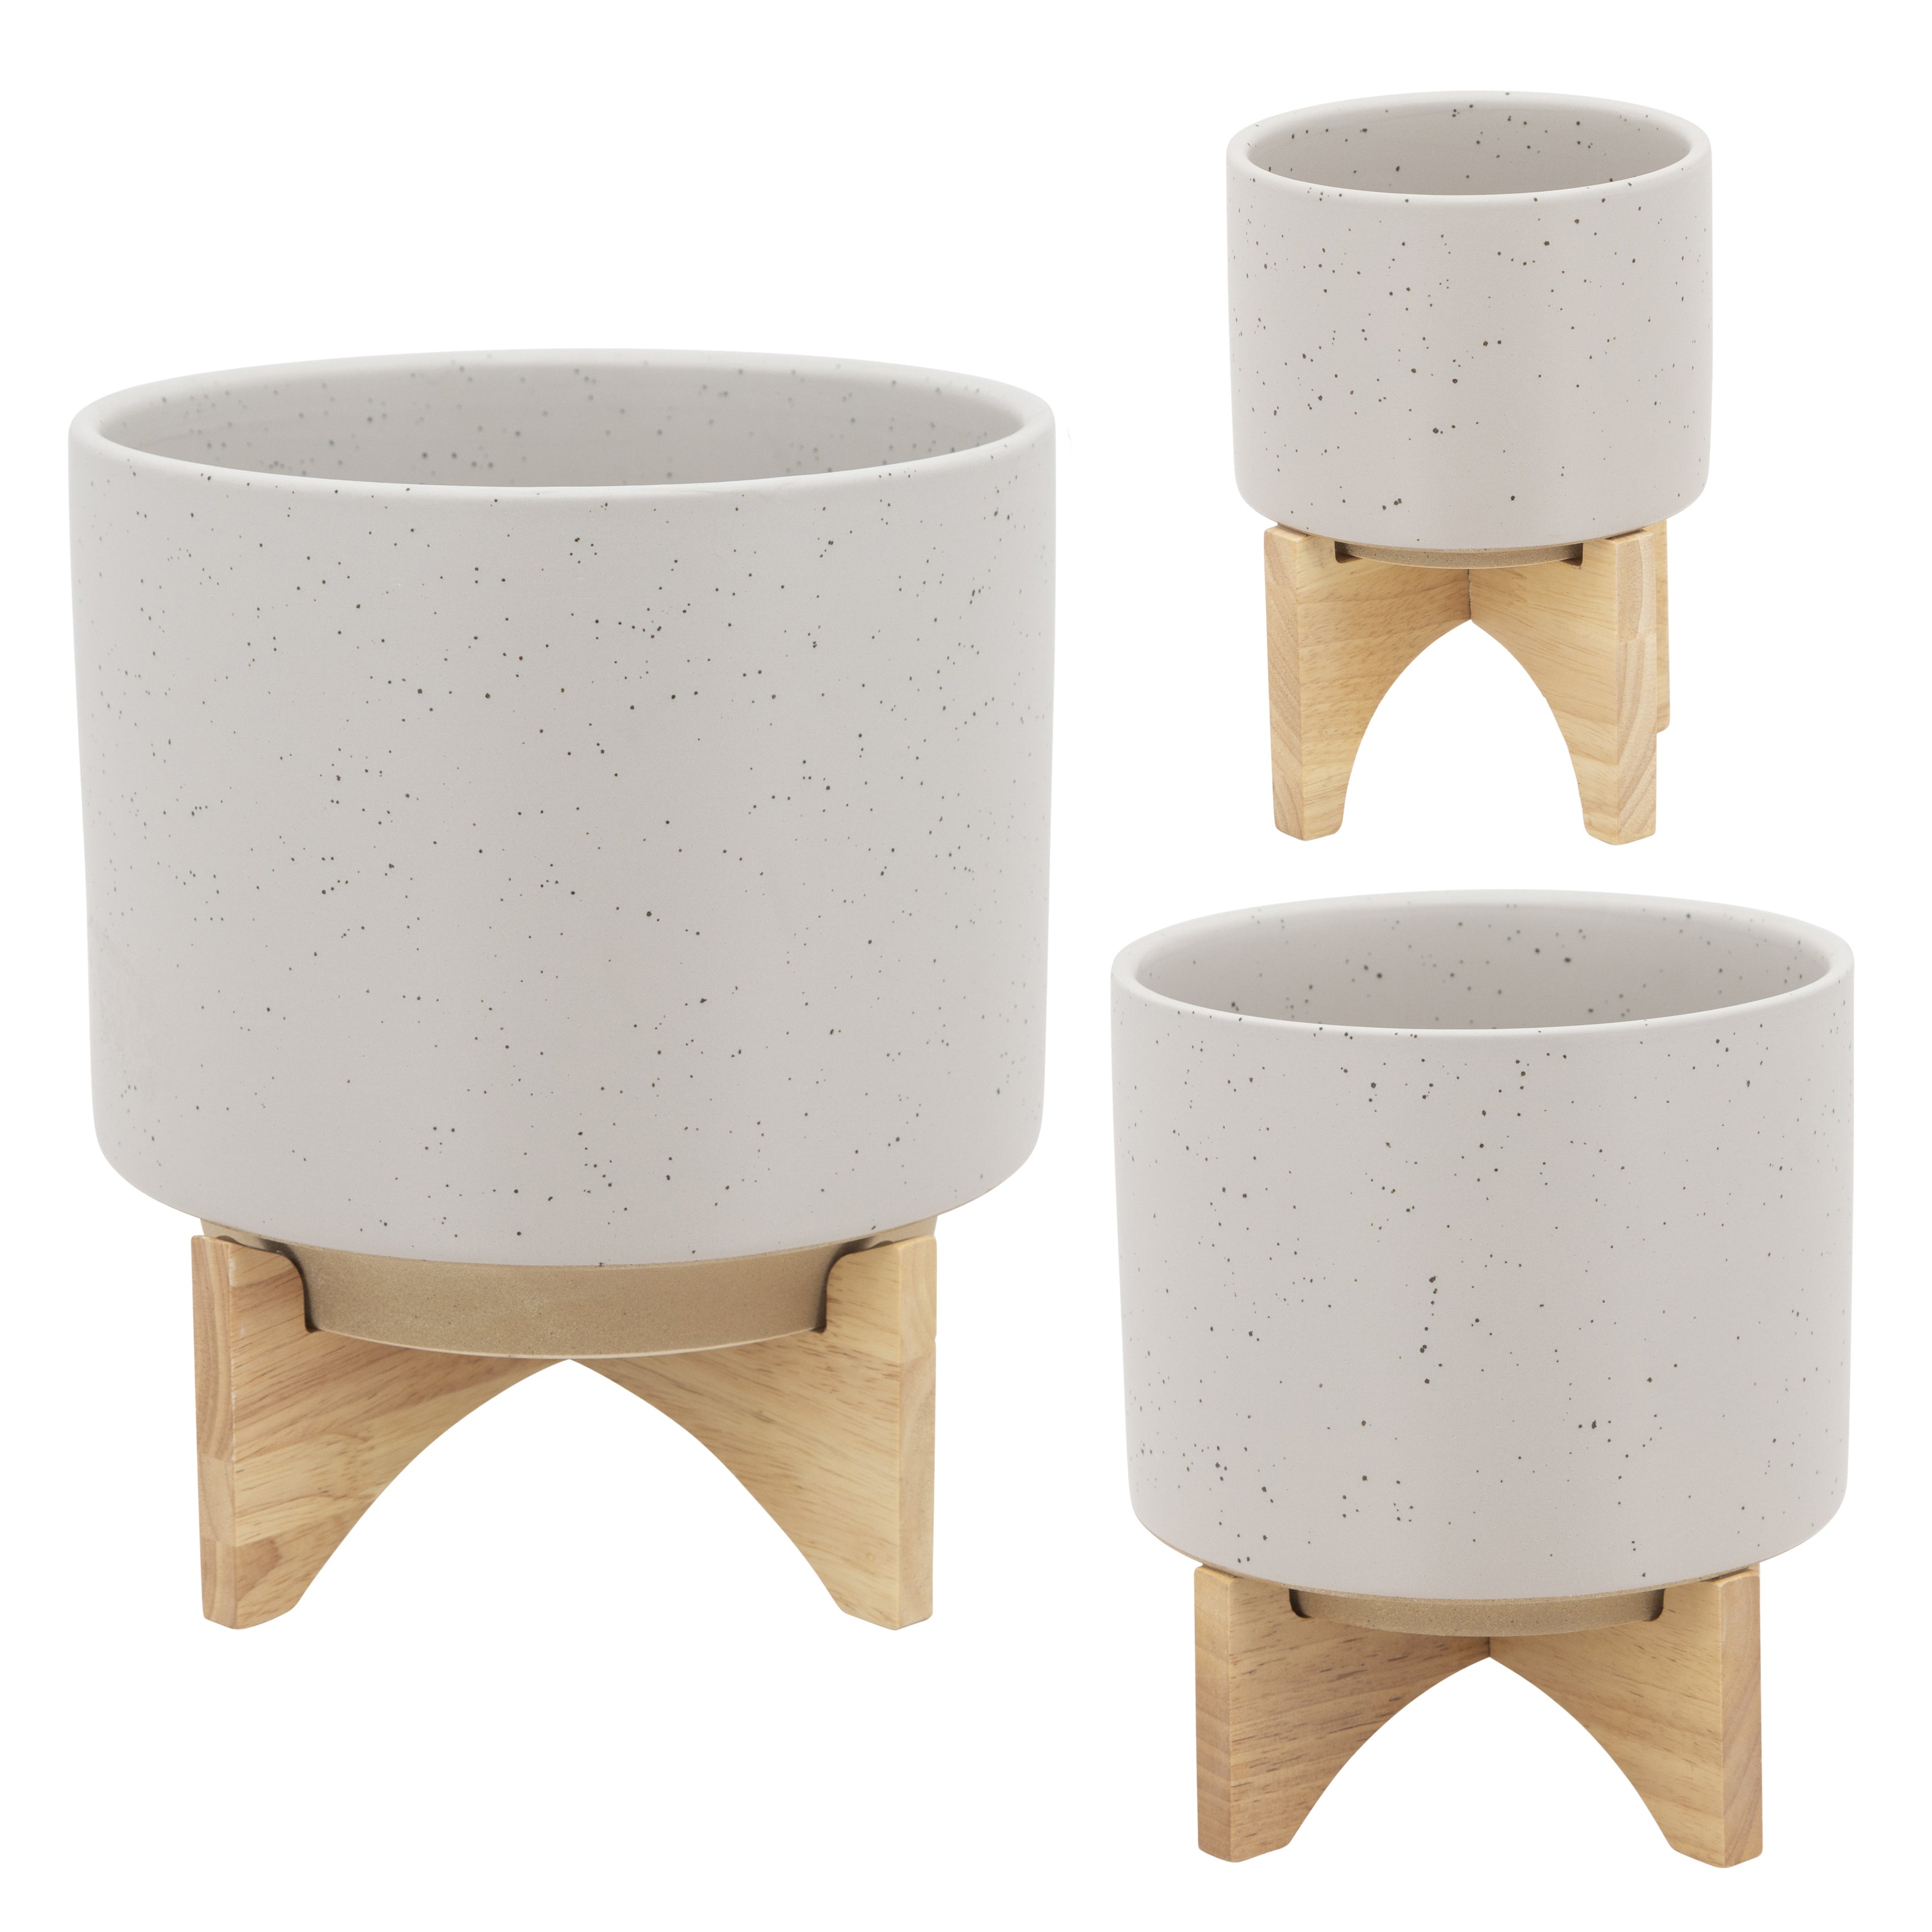 5" Planter with Wood Stand, Matte Beige, Planters